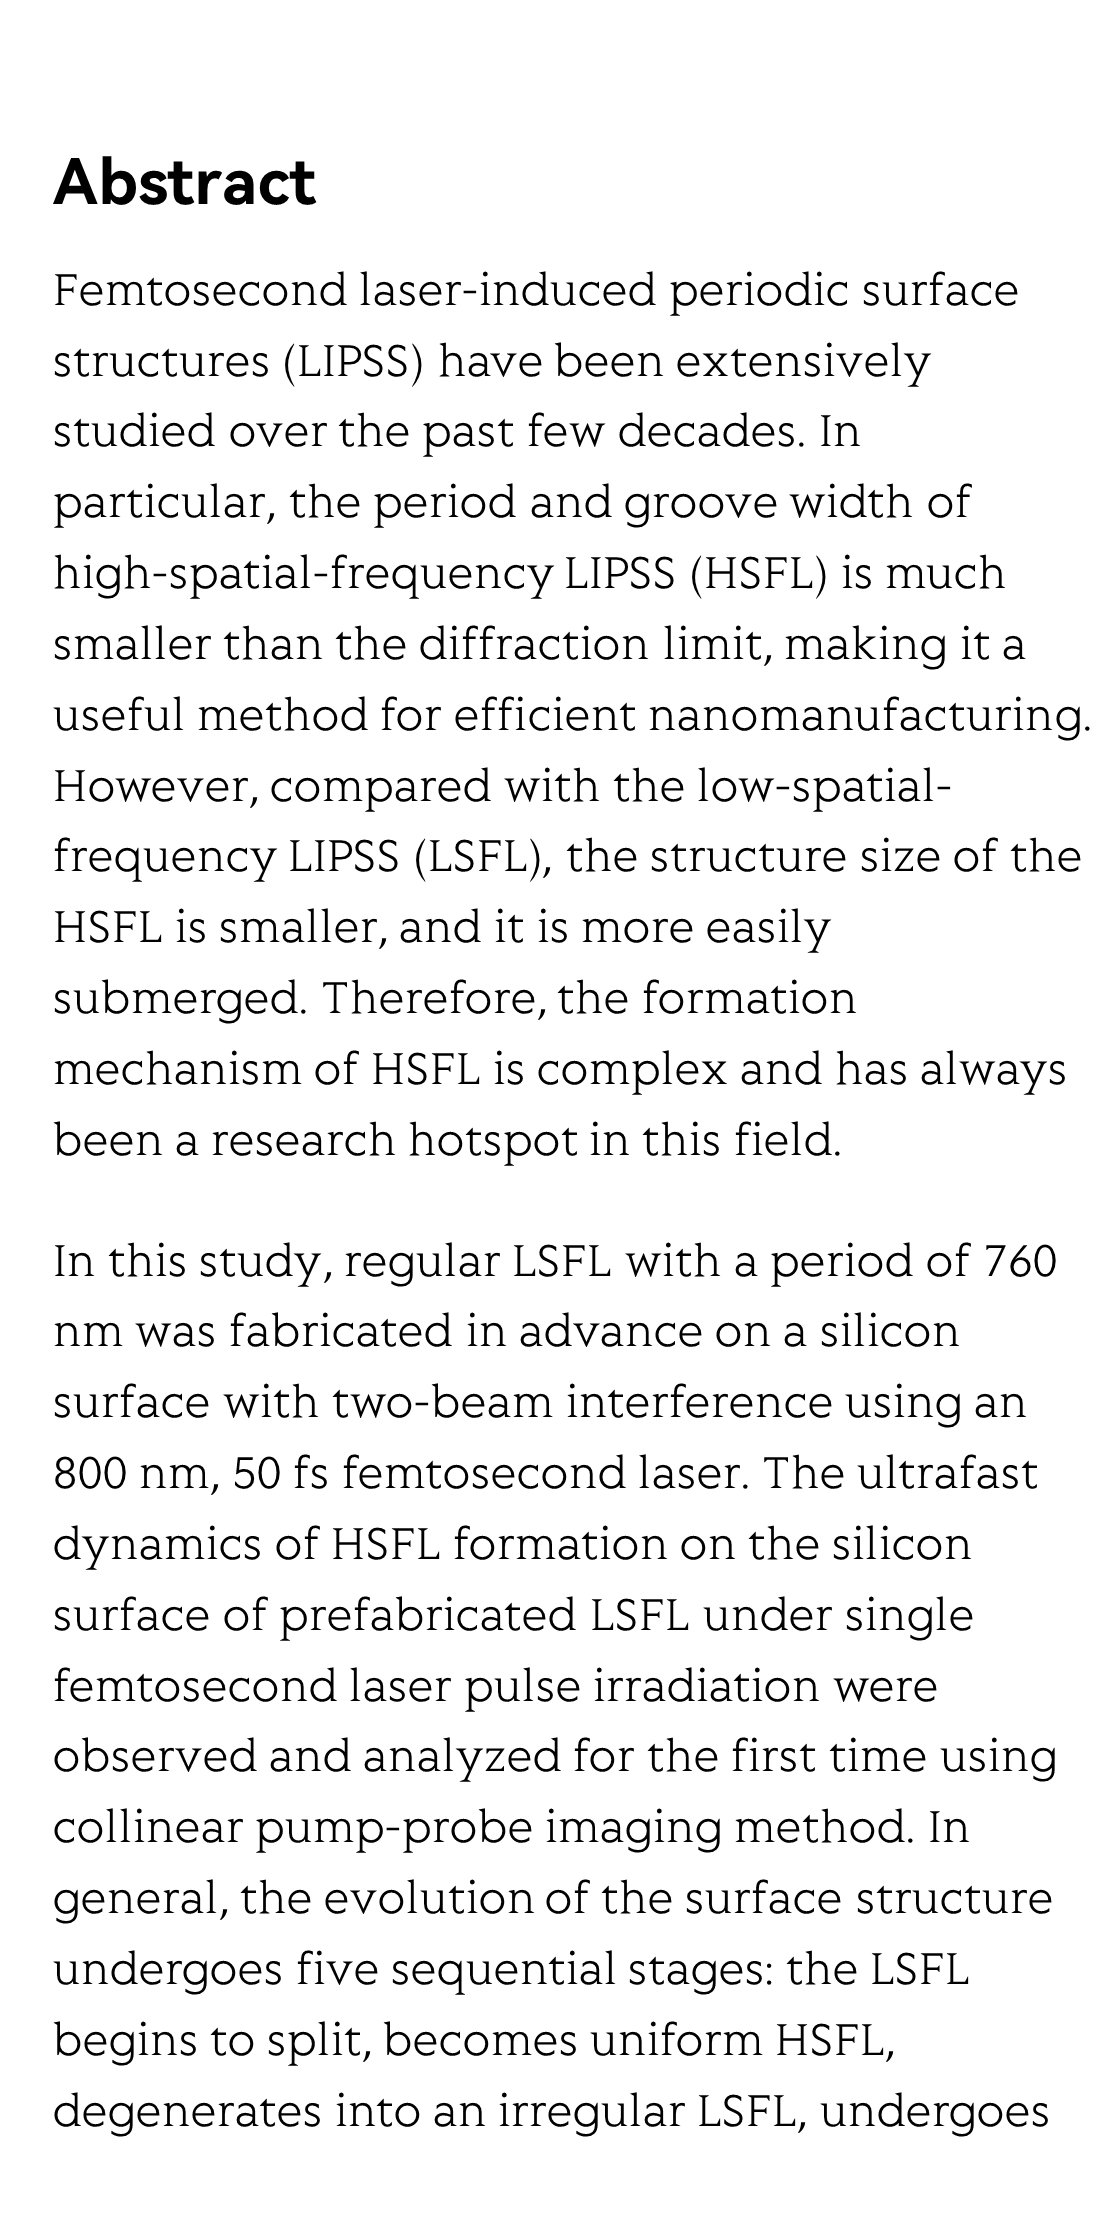 Ultrafast dynamics of femtosecond laser-induced high spatial frequency periodic structures on silicon surfaces_2